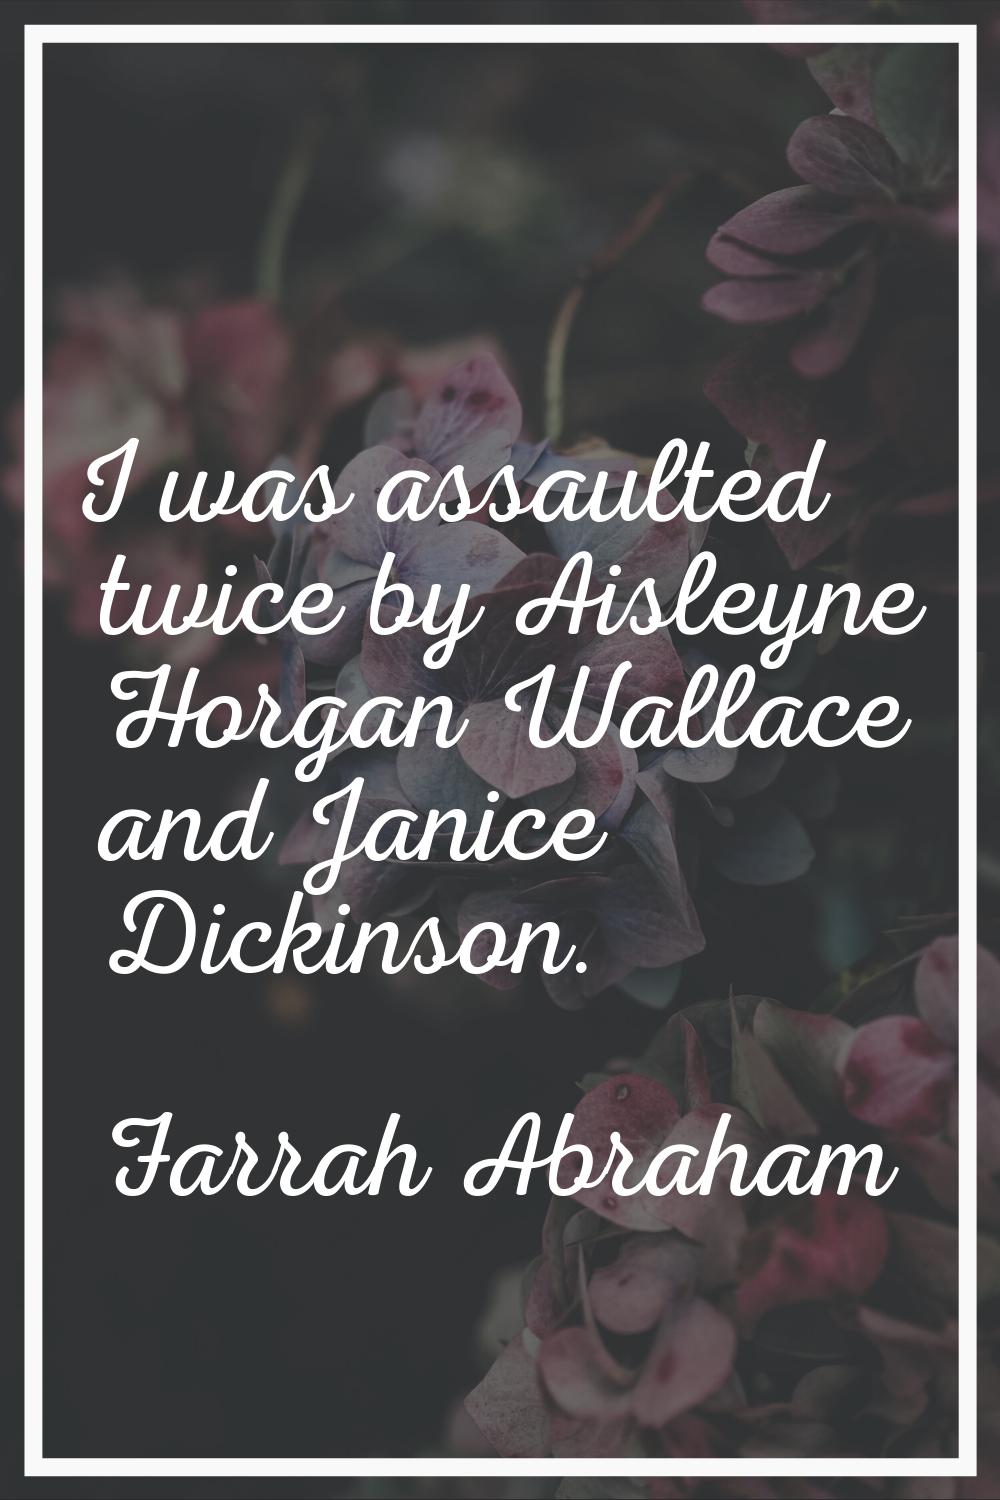 I was assaulted twice by Aisleyne Horgan Wallace and Janice Dickinson.